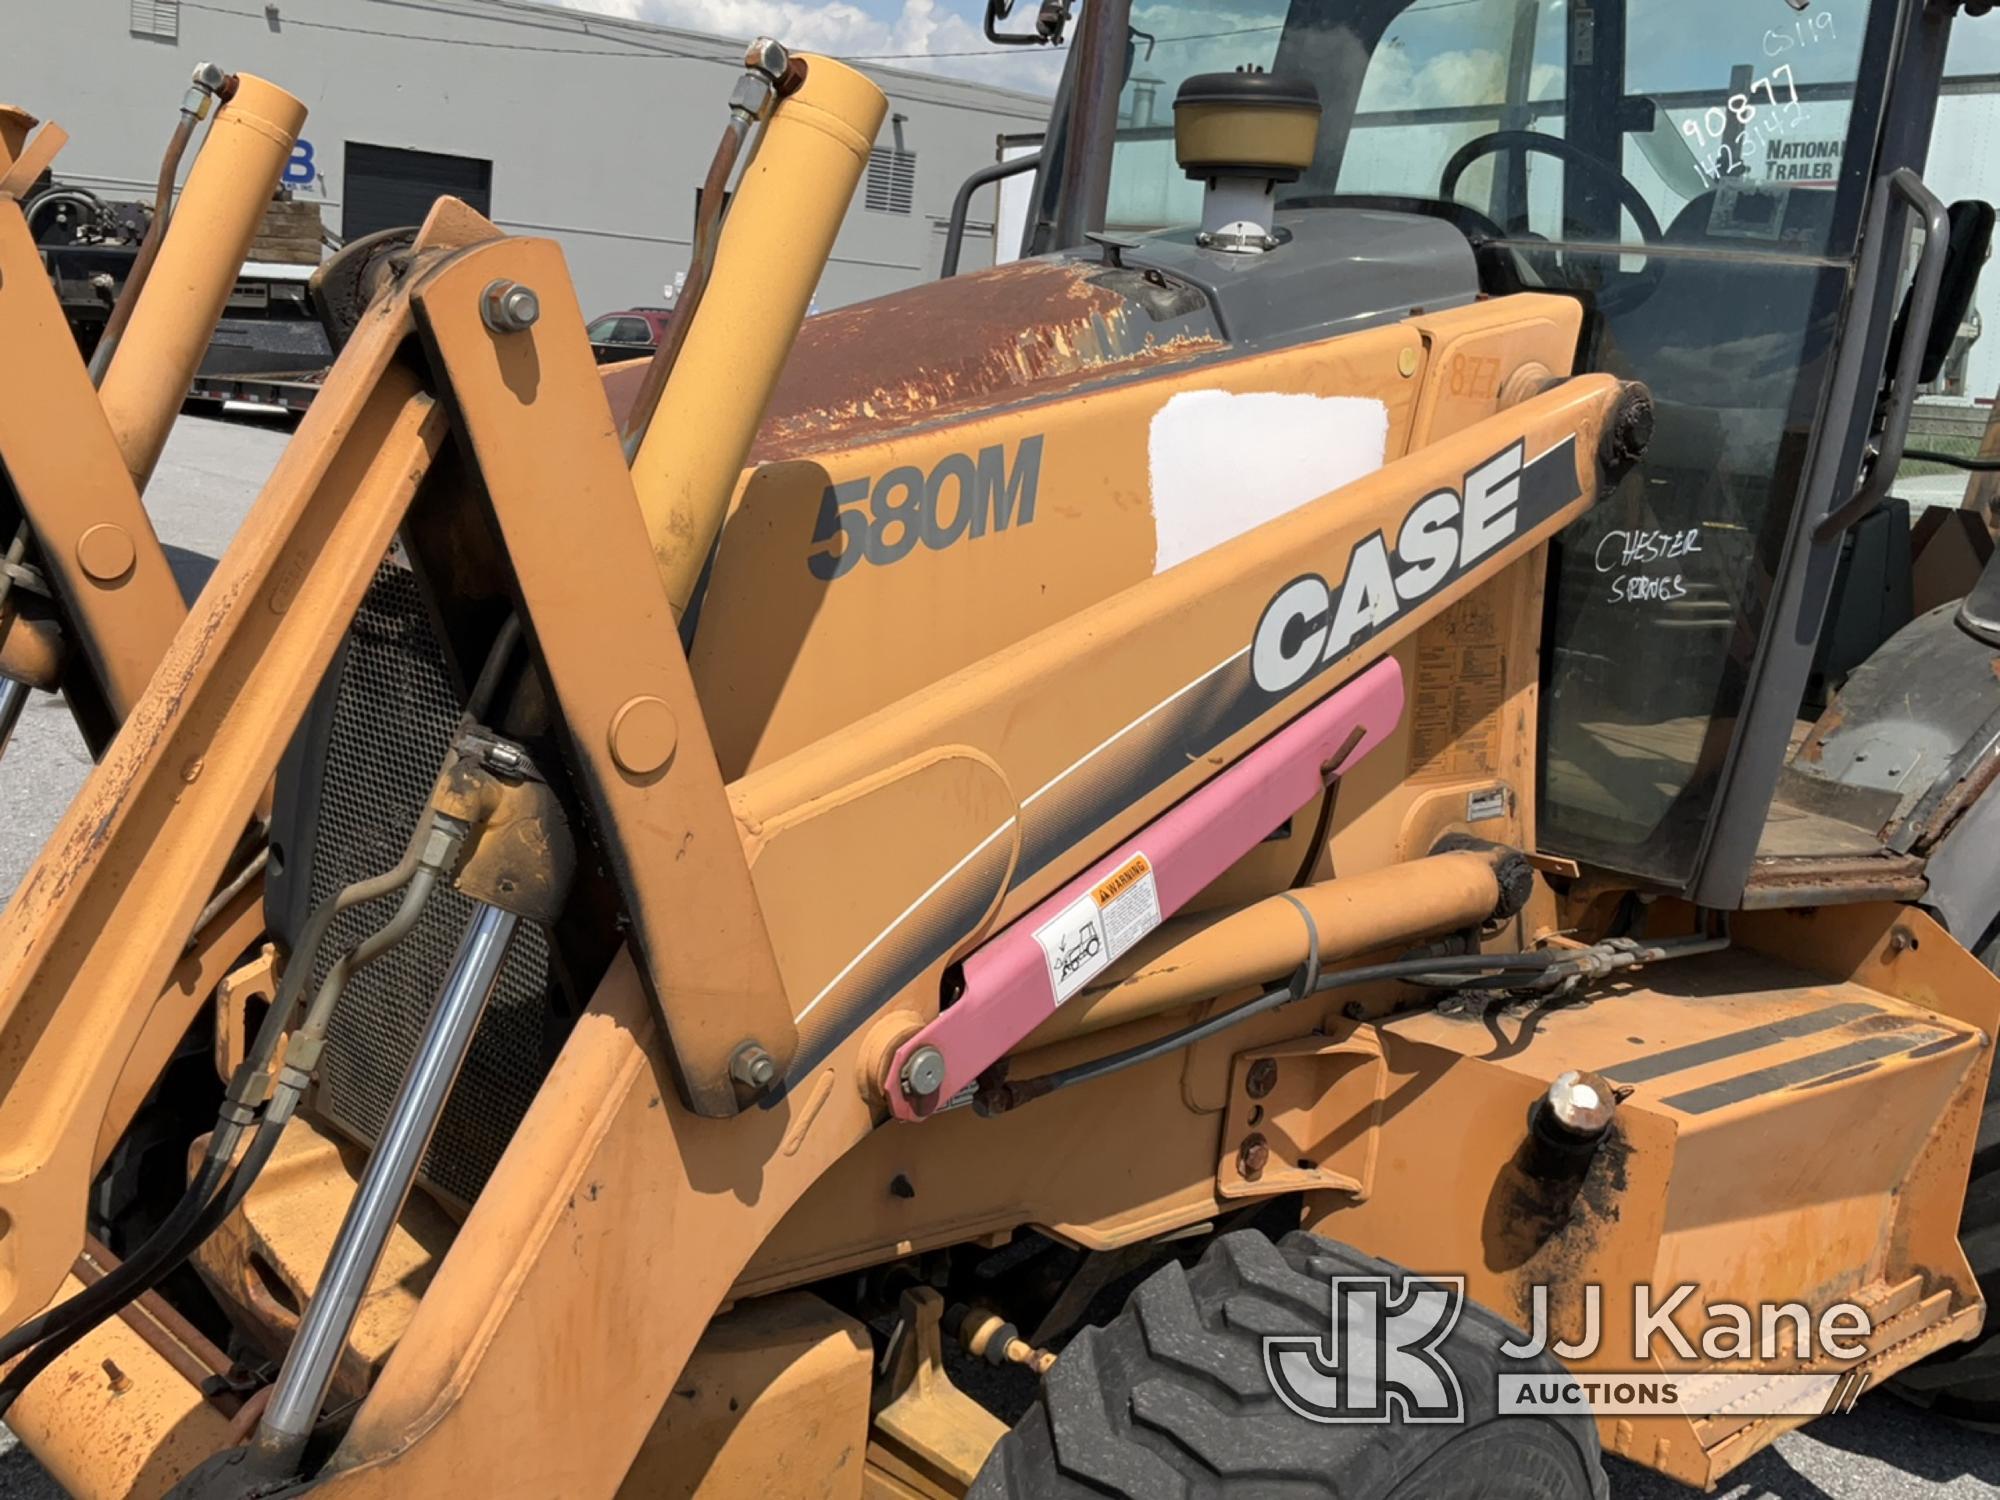 (Chester Springs, PA) 2003 Case 580M 4X4 Tractor Loader Backhoe No Title) (Runs & Moves) (Inspection